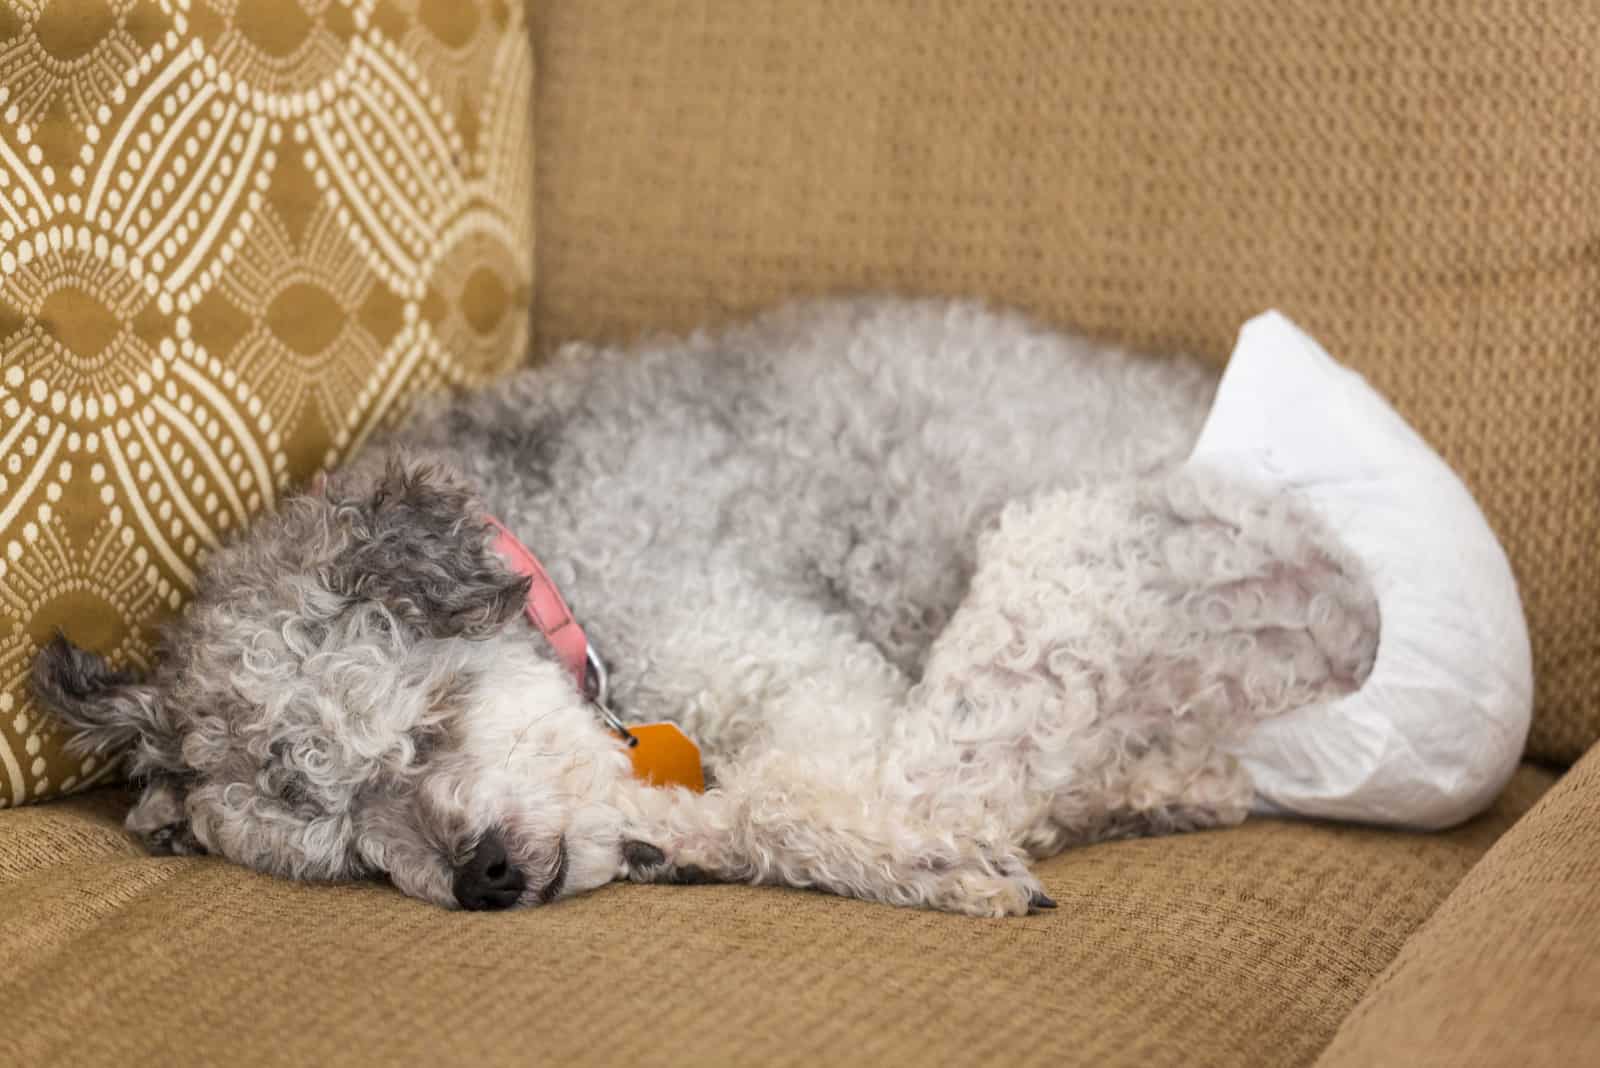 Old yorkshire terrier poodle mix dog asleep on couch and wearing a doggy diaper